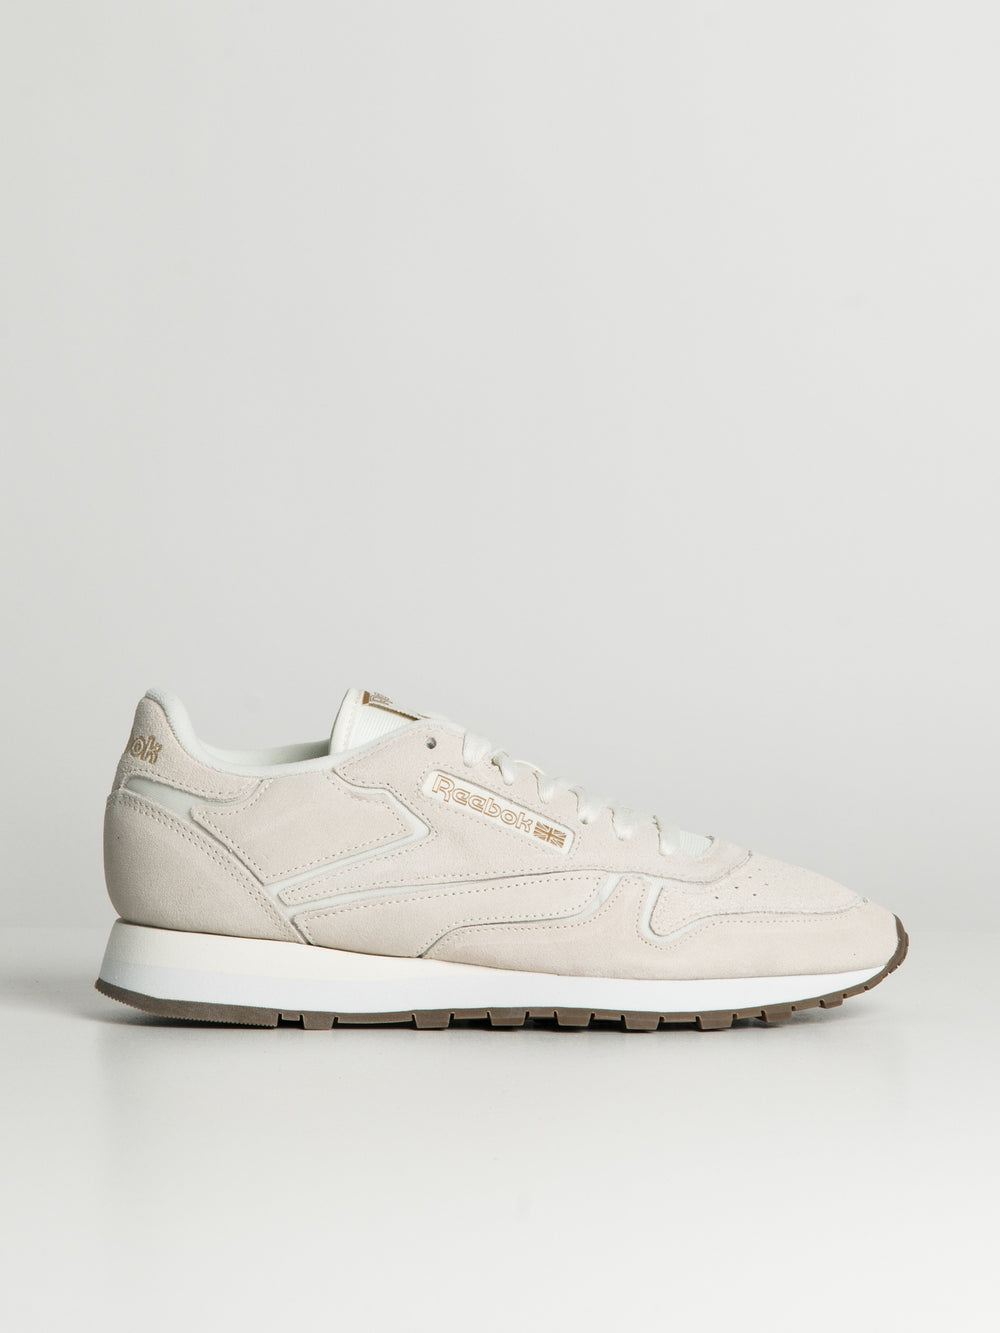 MENS REEBOK CLASSIC LEATHER - CLEARANCE